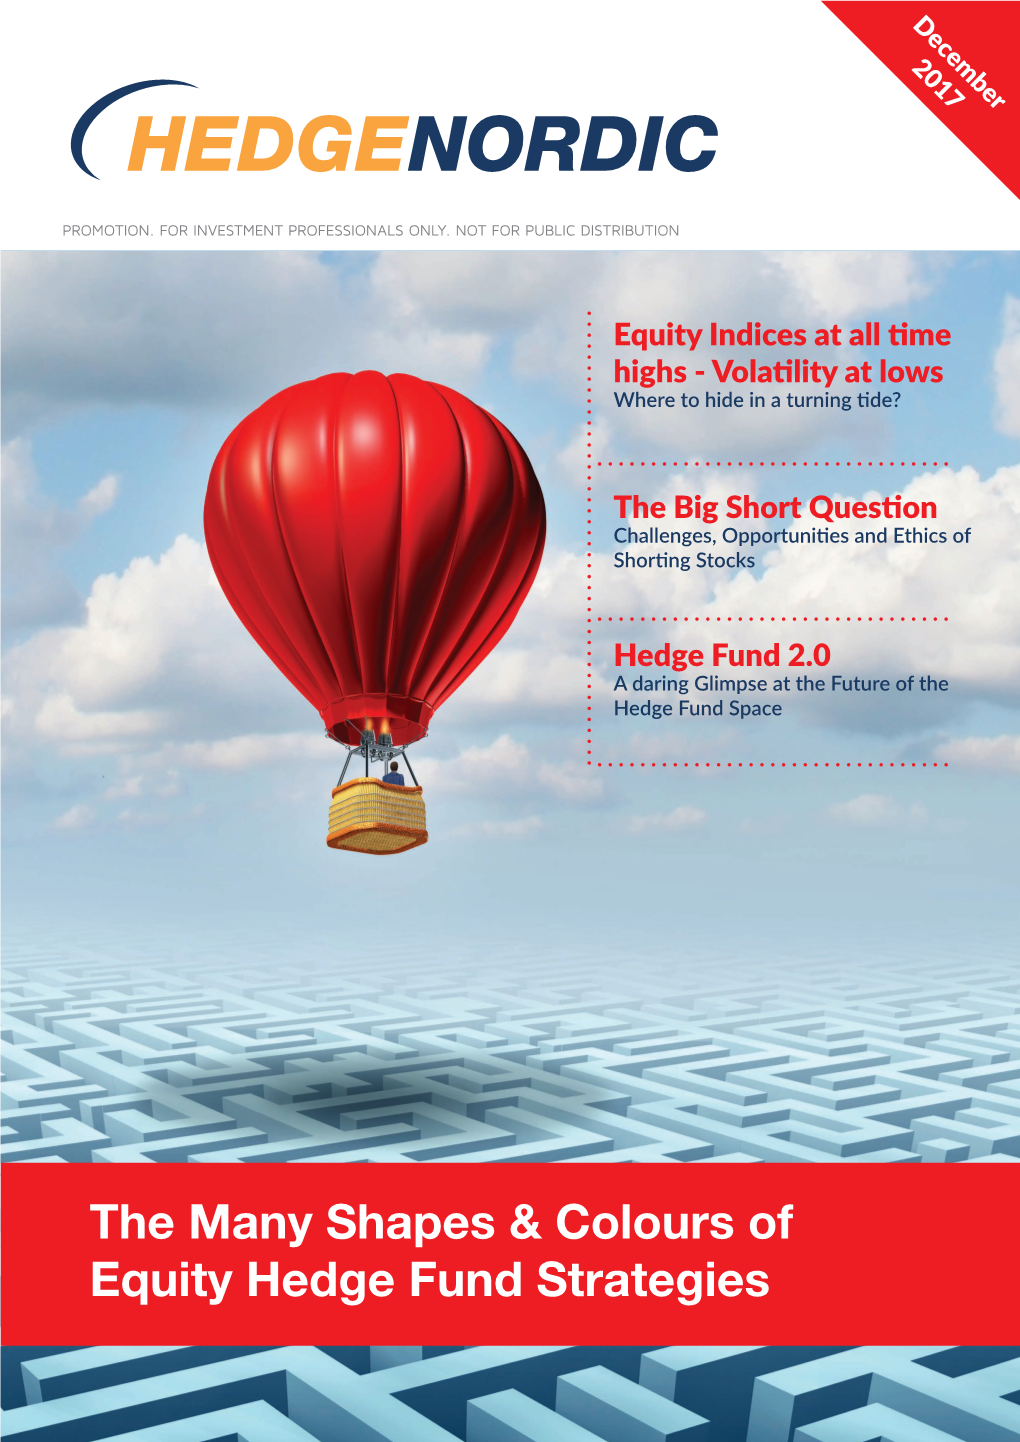 The Many Shapes & Colours of Equity Hedge Fund Strategies